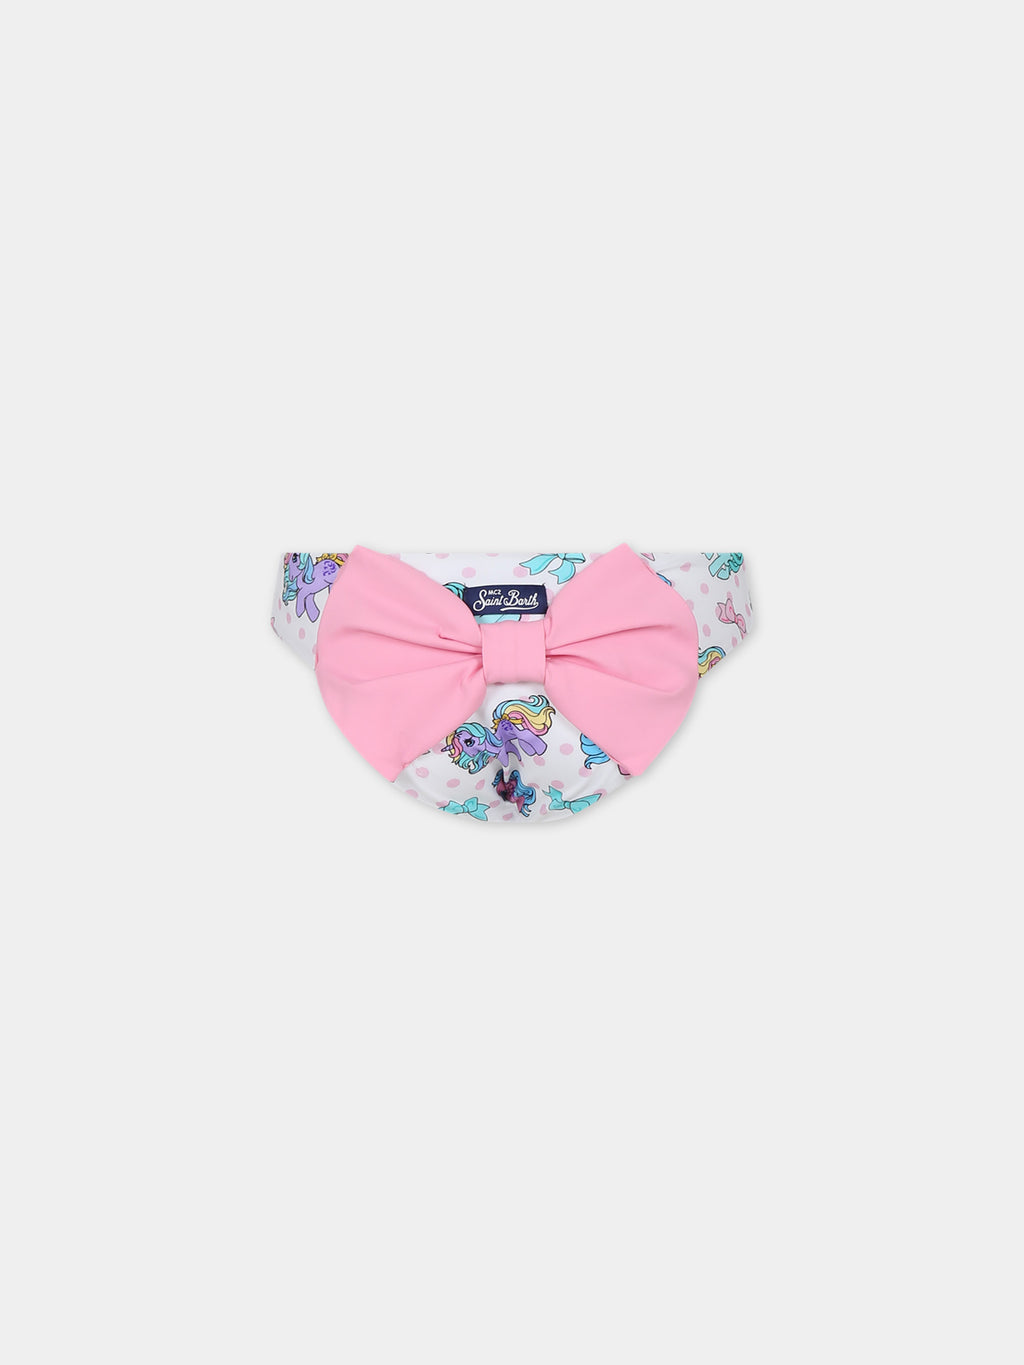 White swim briefs for girl with bow and unicorns